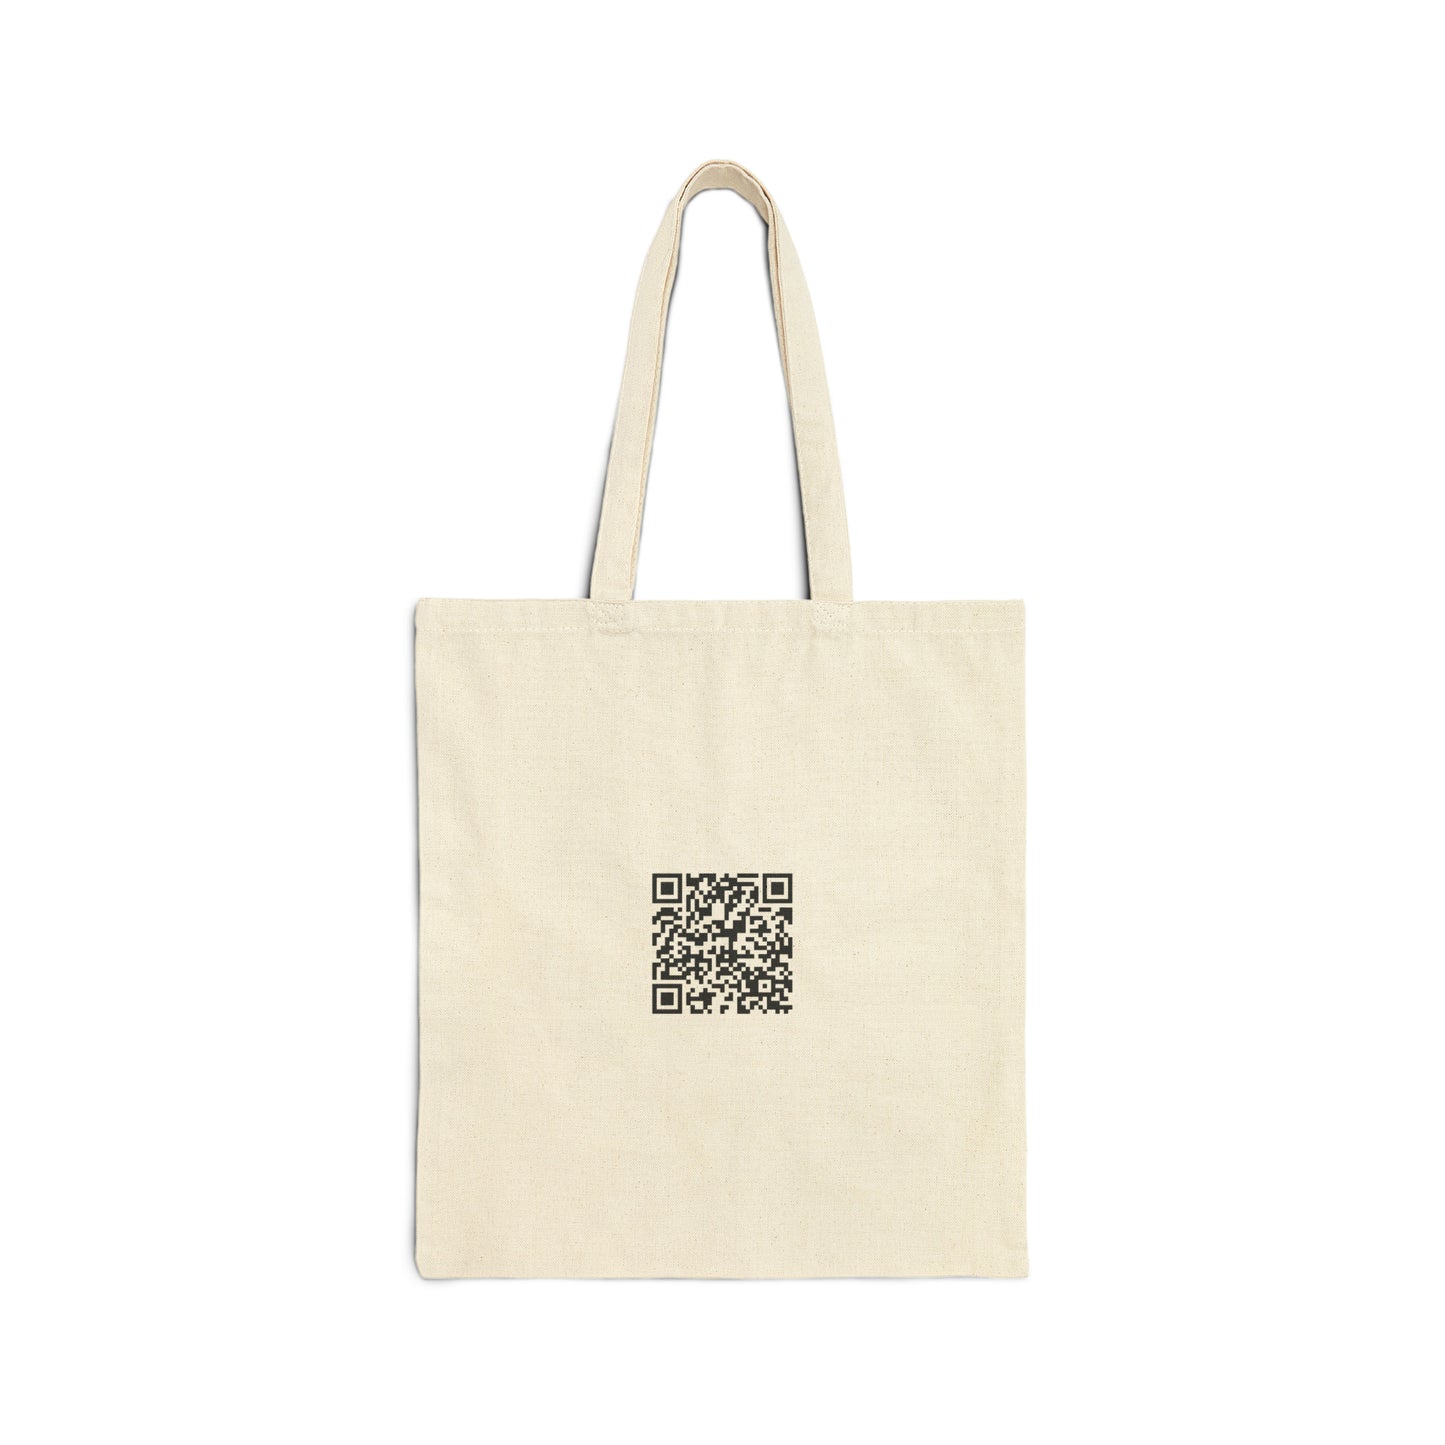 Mask Of The Nobleman - Cotton Canvas Tote Bag